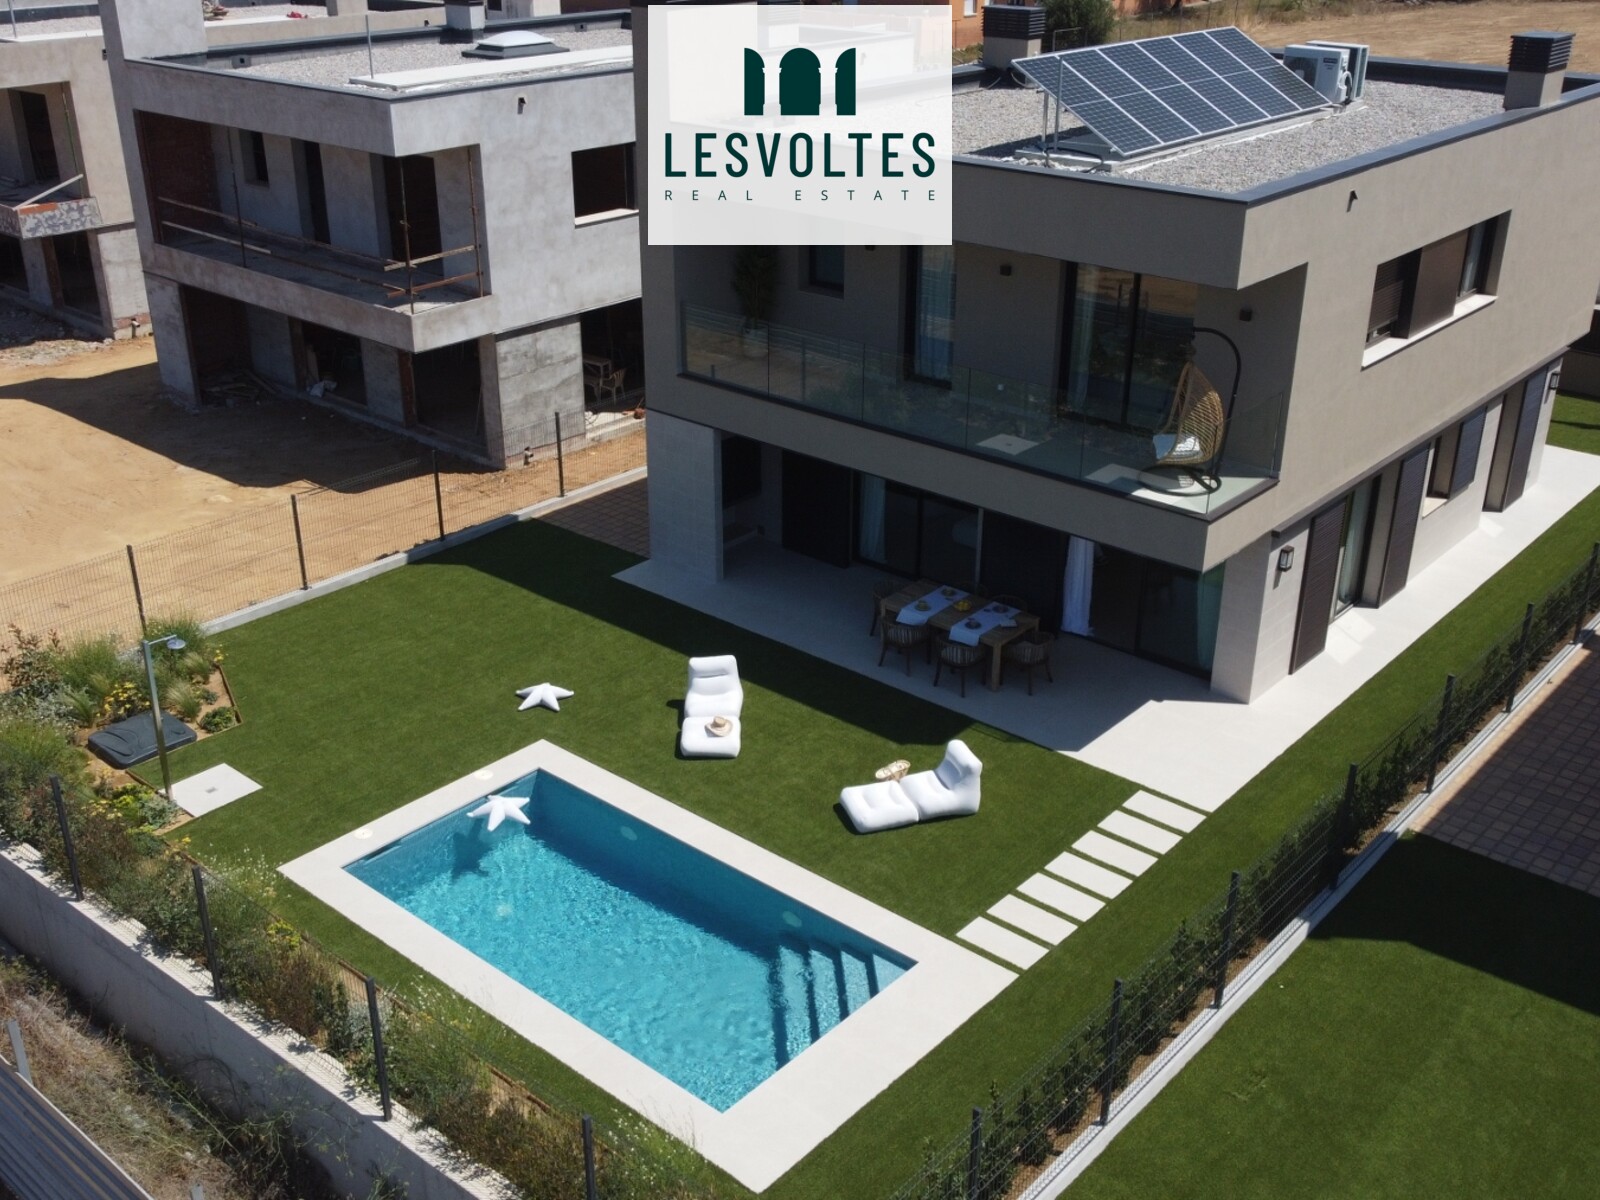 NEW SINGLE-FAMILY HOUSES WITH GARDEN AND SWIMMING POOL LOCATED IN THE VILLAGE OF PALS.